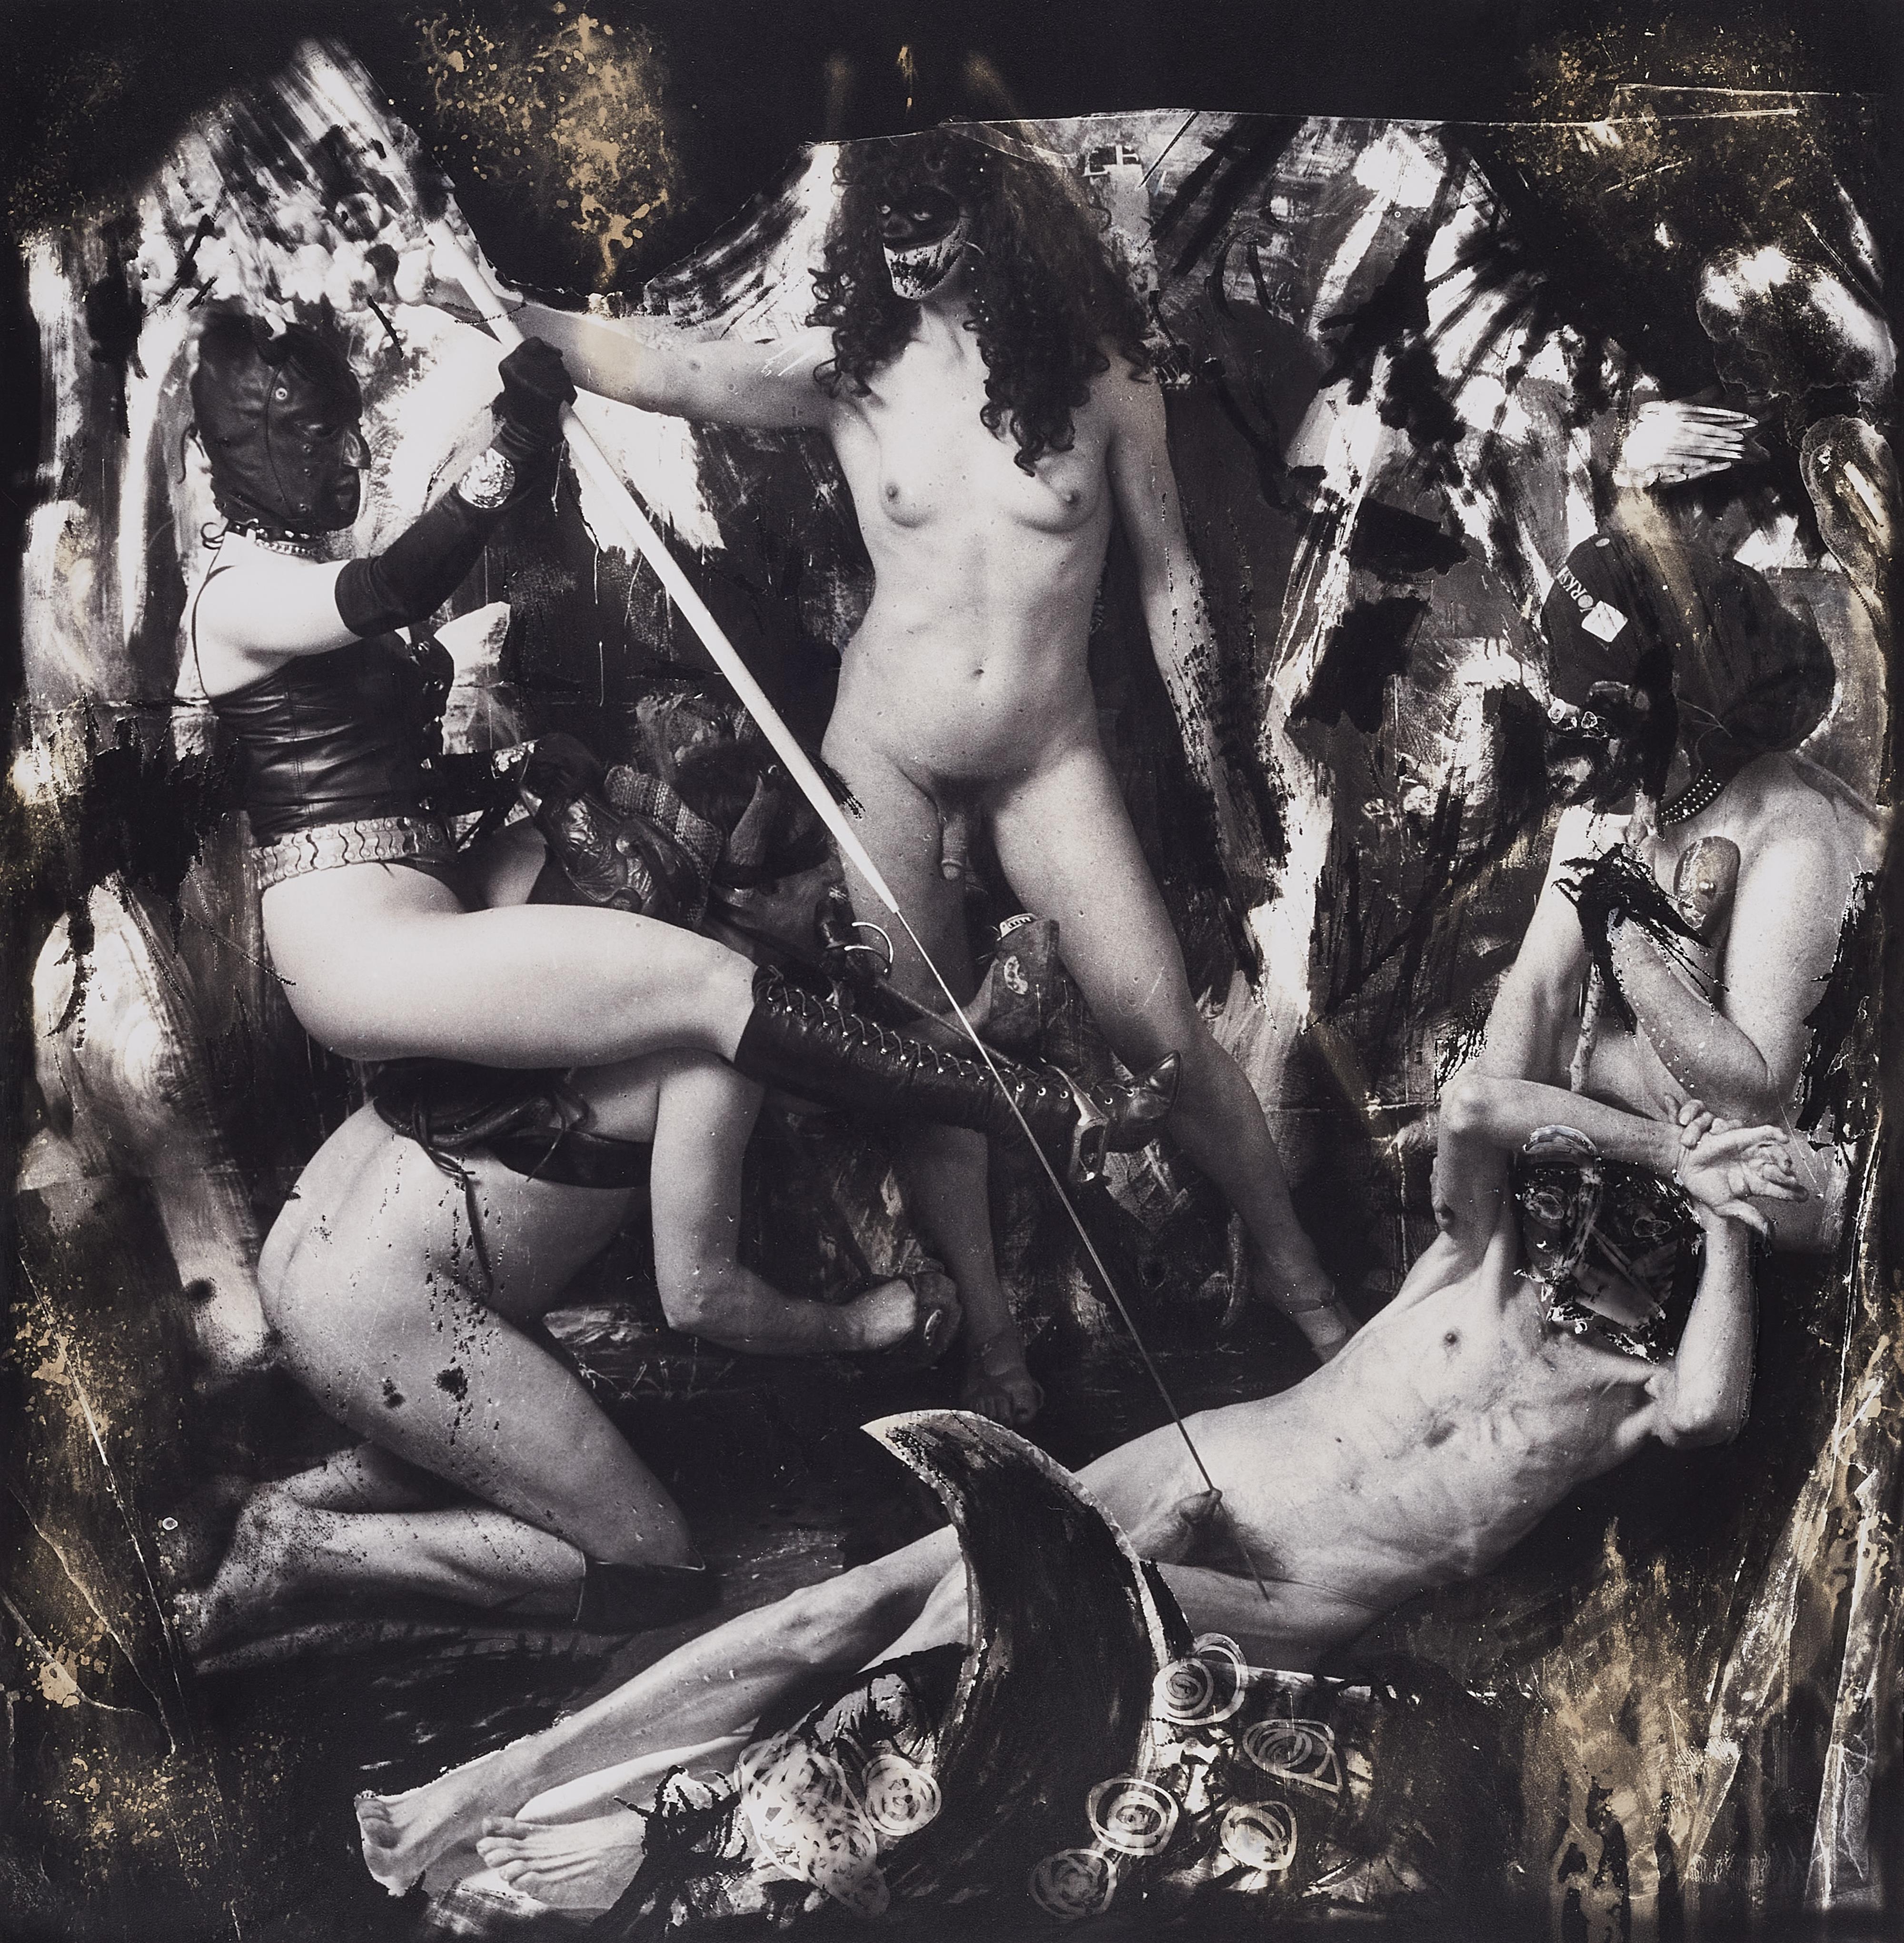 Joel-Peter Witkin - Apollonia and Dominetrix Creating Pain in the Art of the West, New York City - image-1